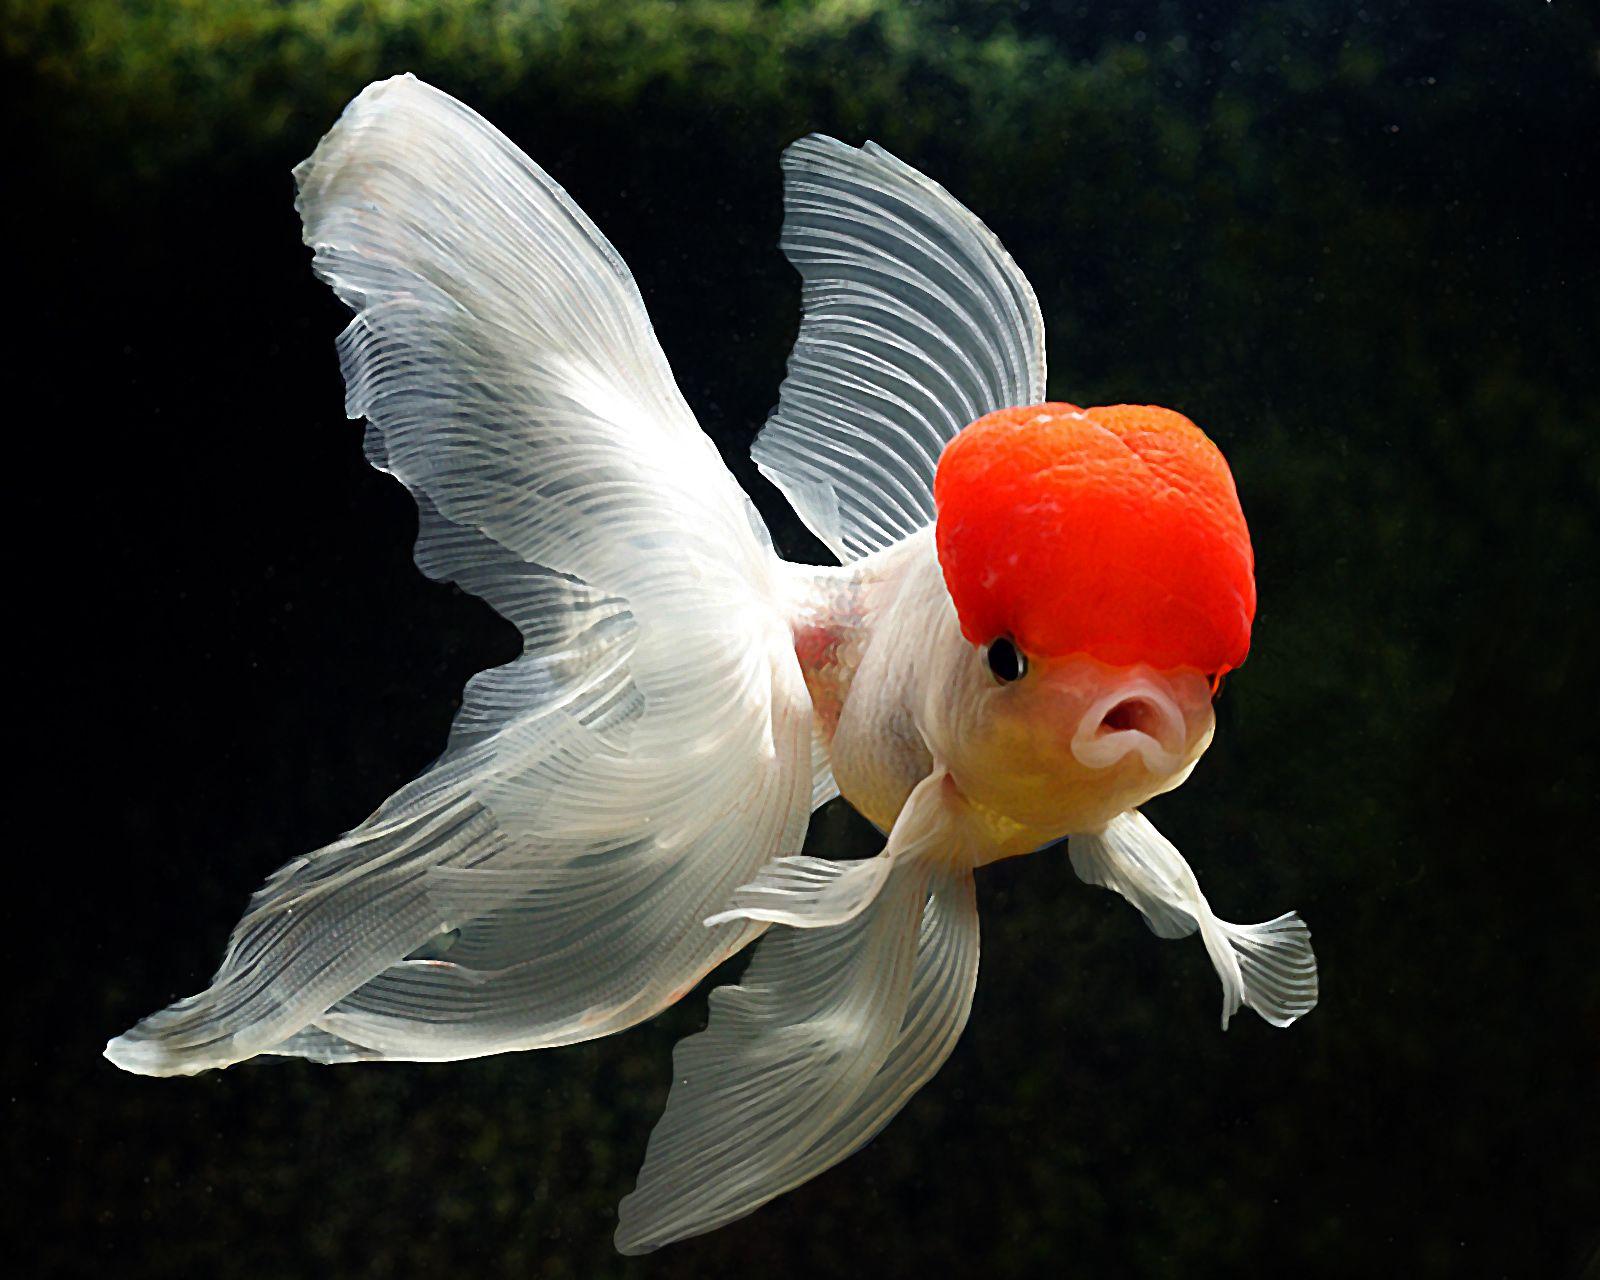 fancy goldfish varities.. and prominent distinguishing